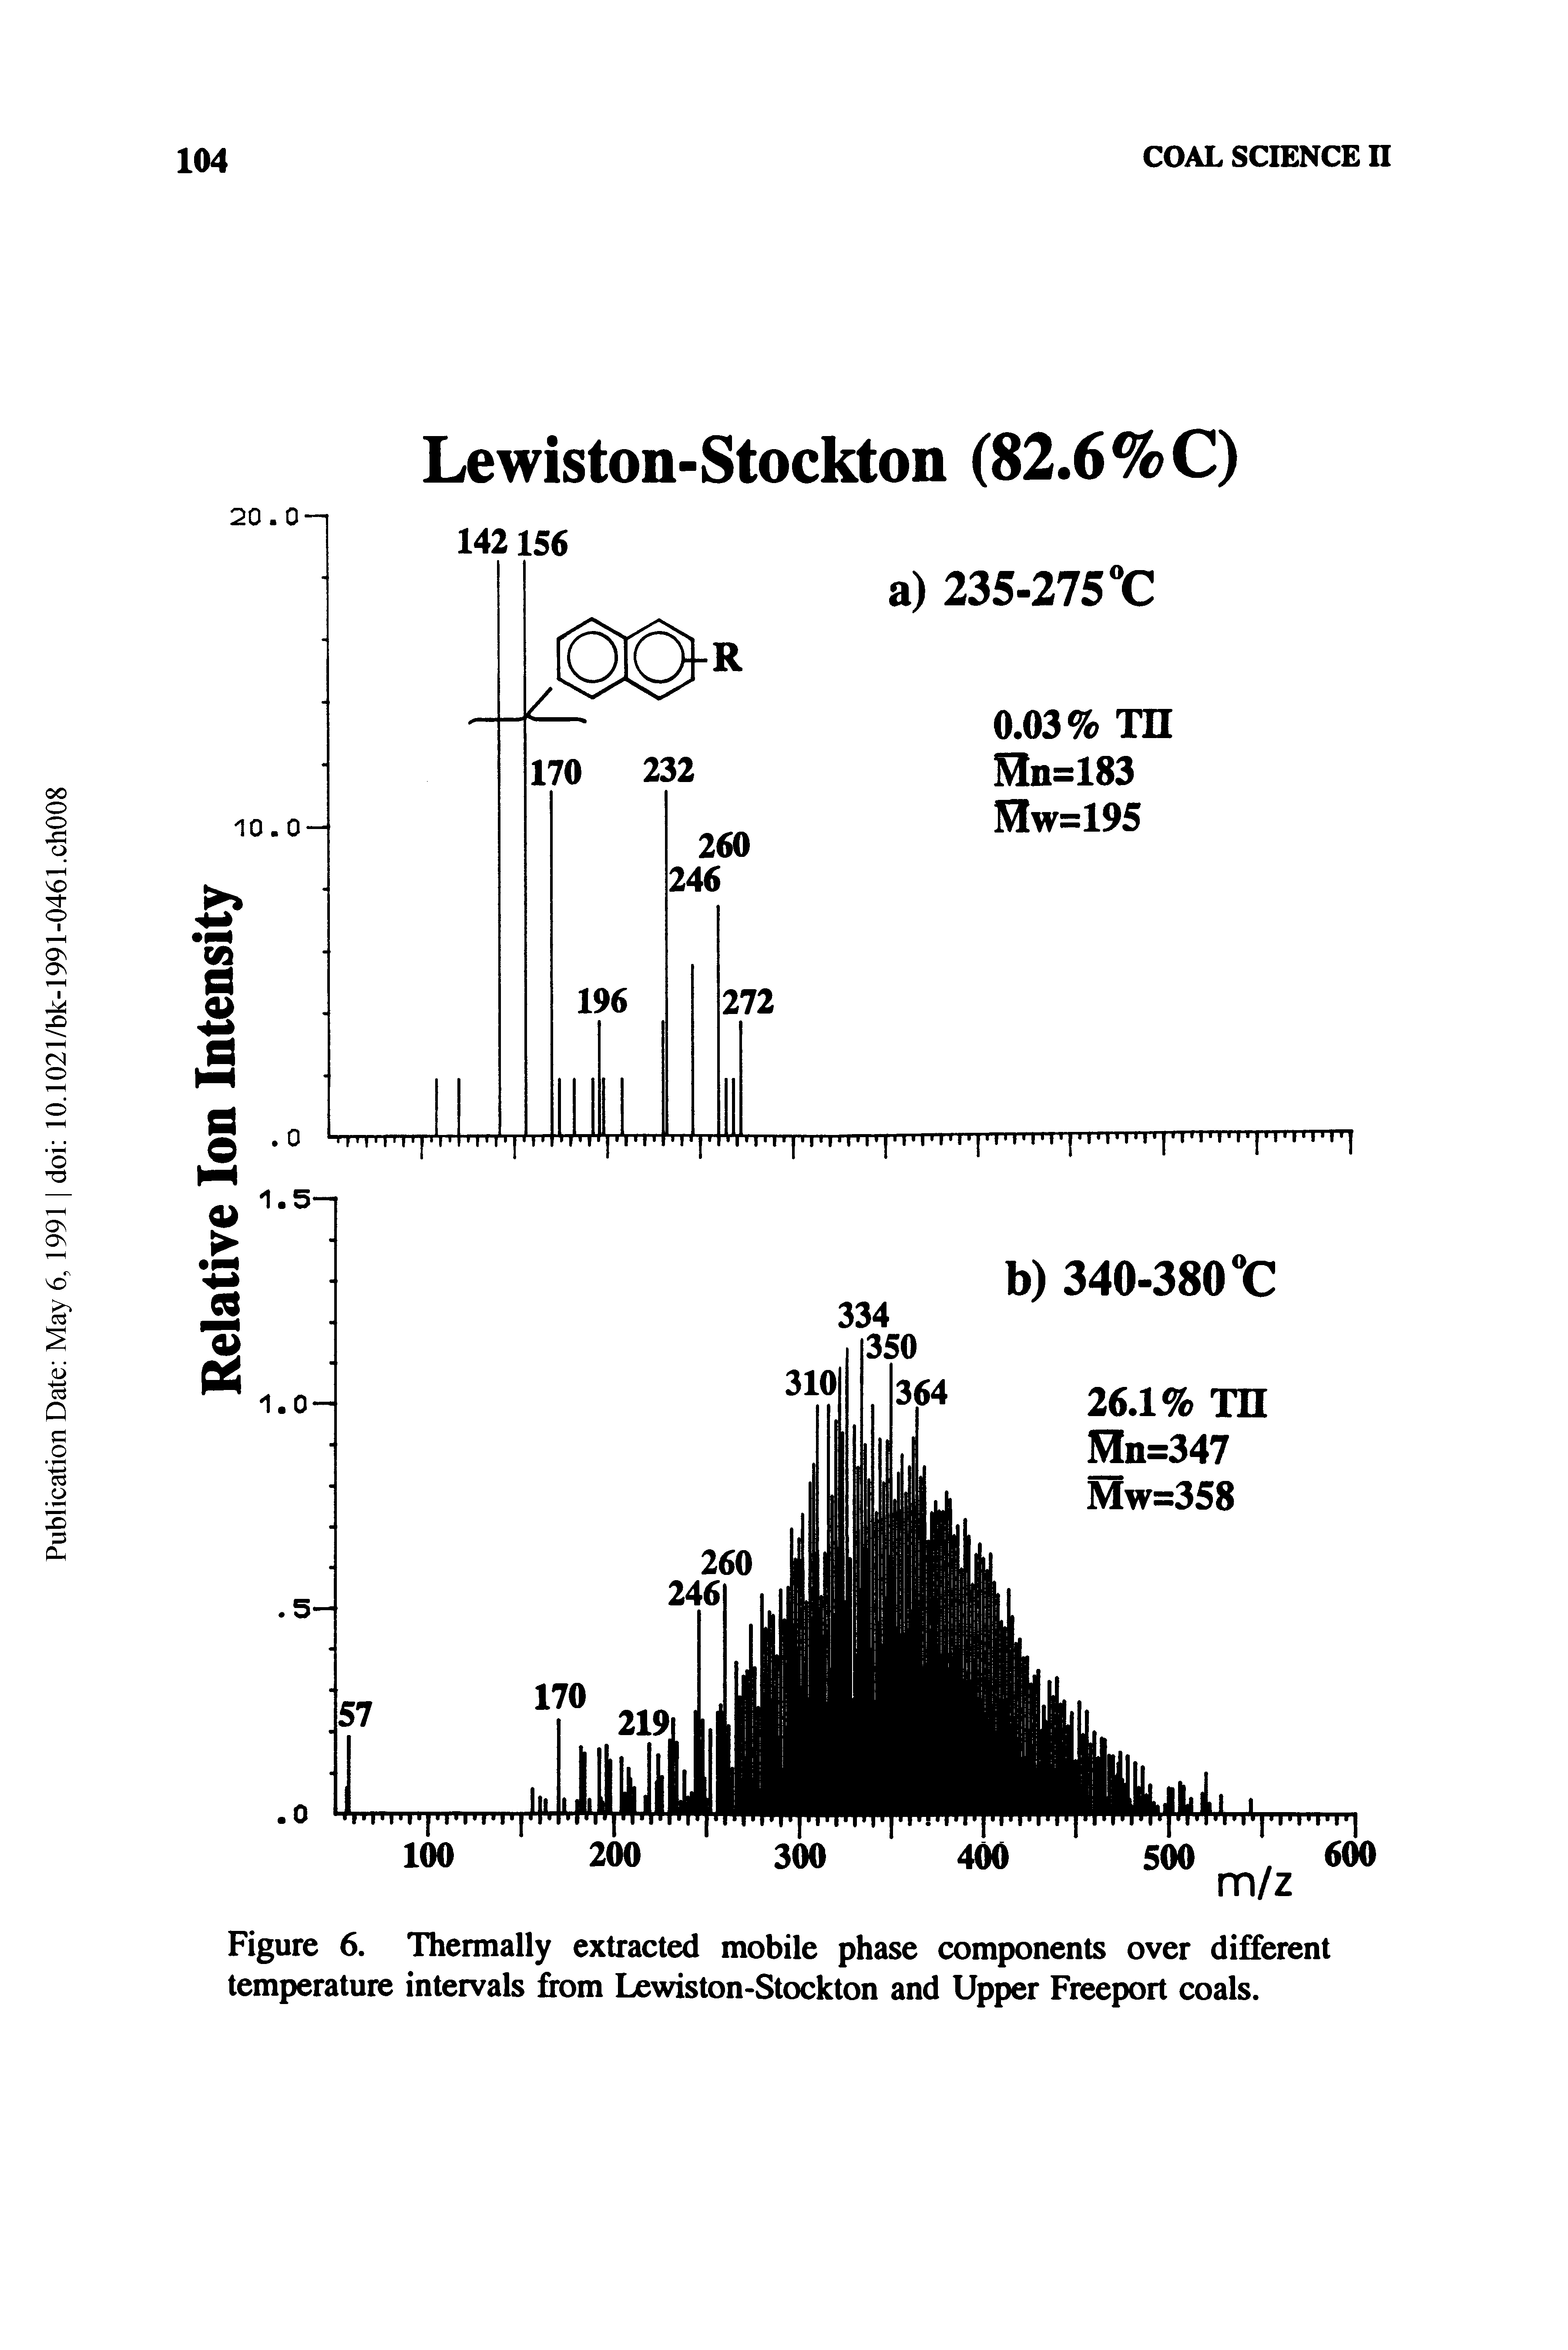 Figure 6. Thermally extracted mobile phase components over different temperature intervals from Lewiston-Stockton and Upper Freeport coals.